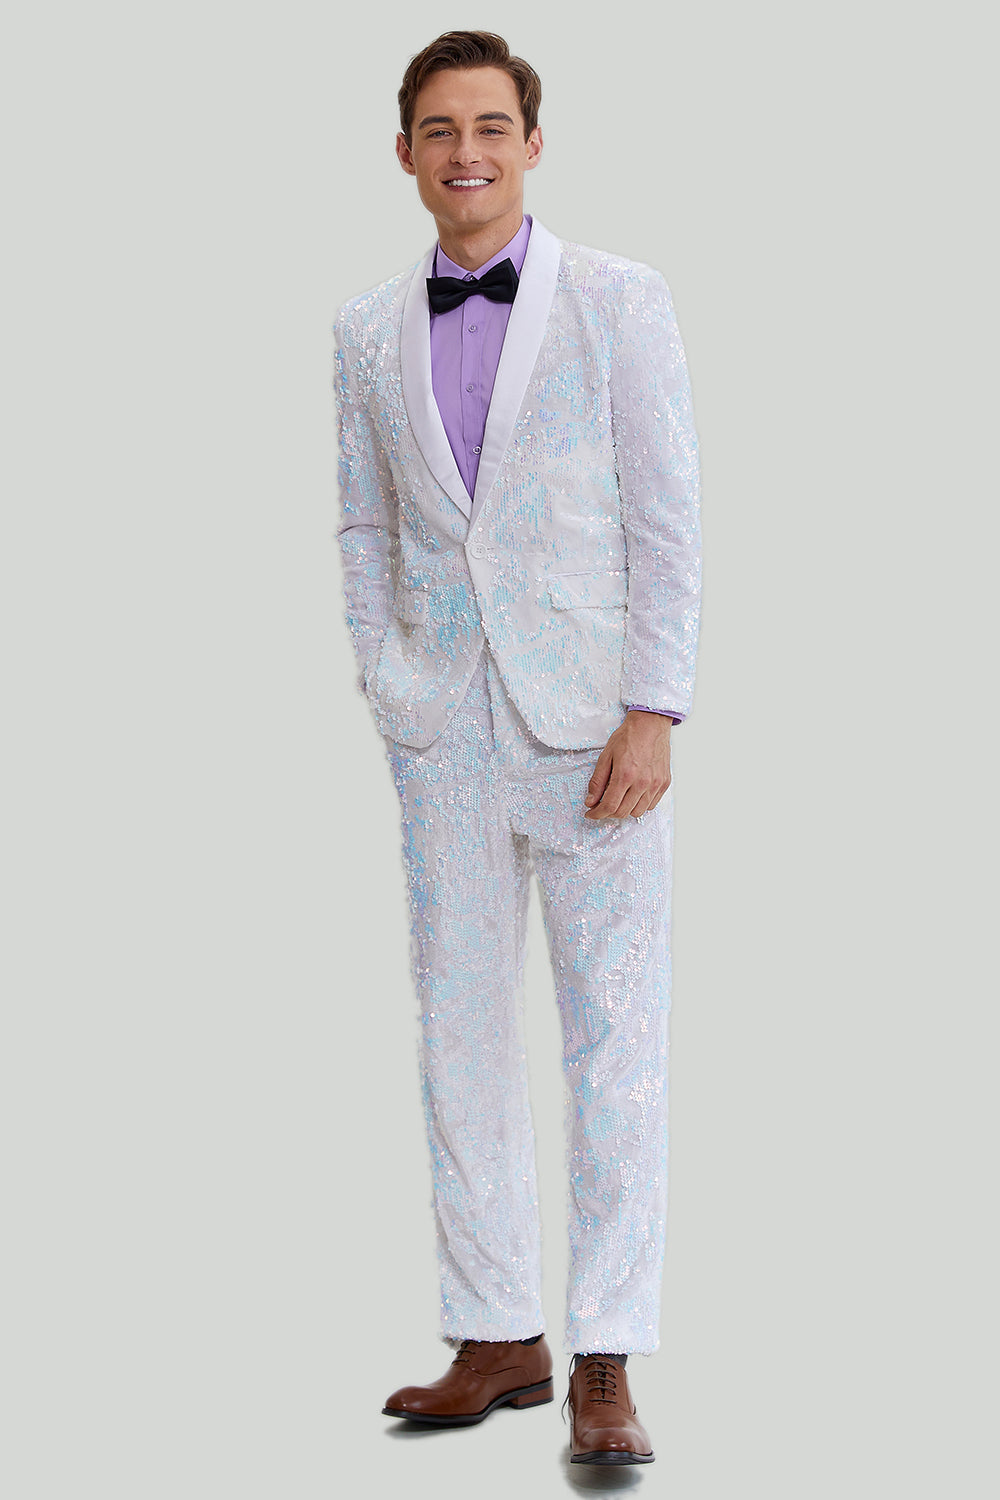 ZAPAKA Men's White Homecoming Suits Slim Fit 2 Piece One Button